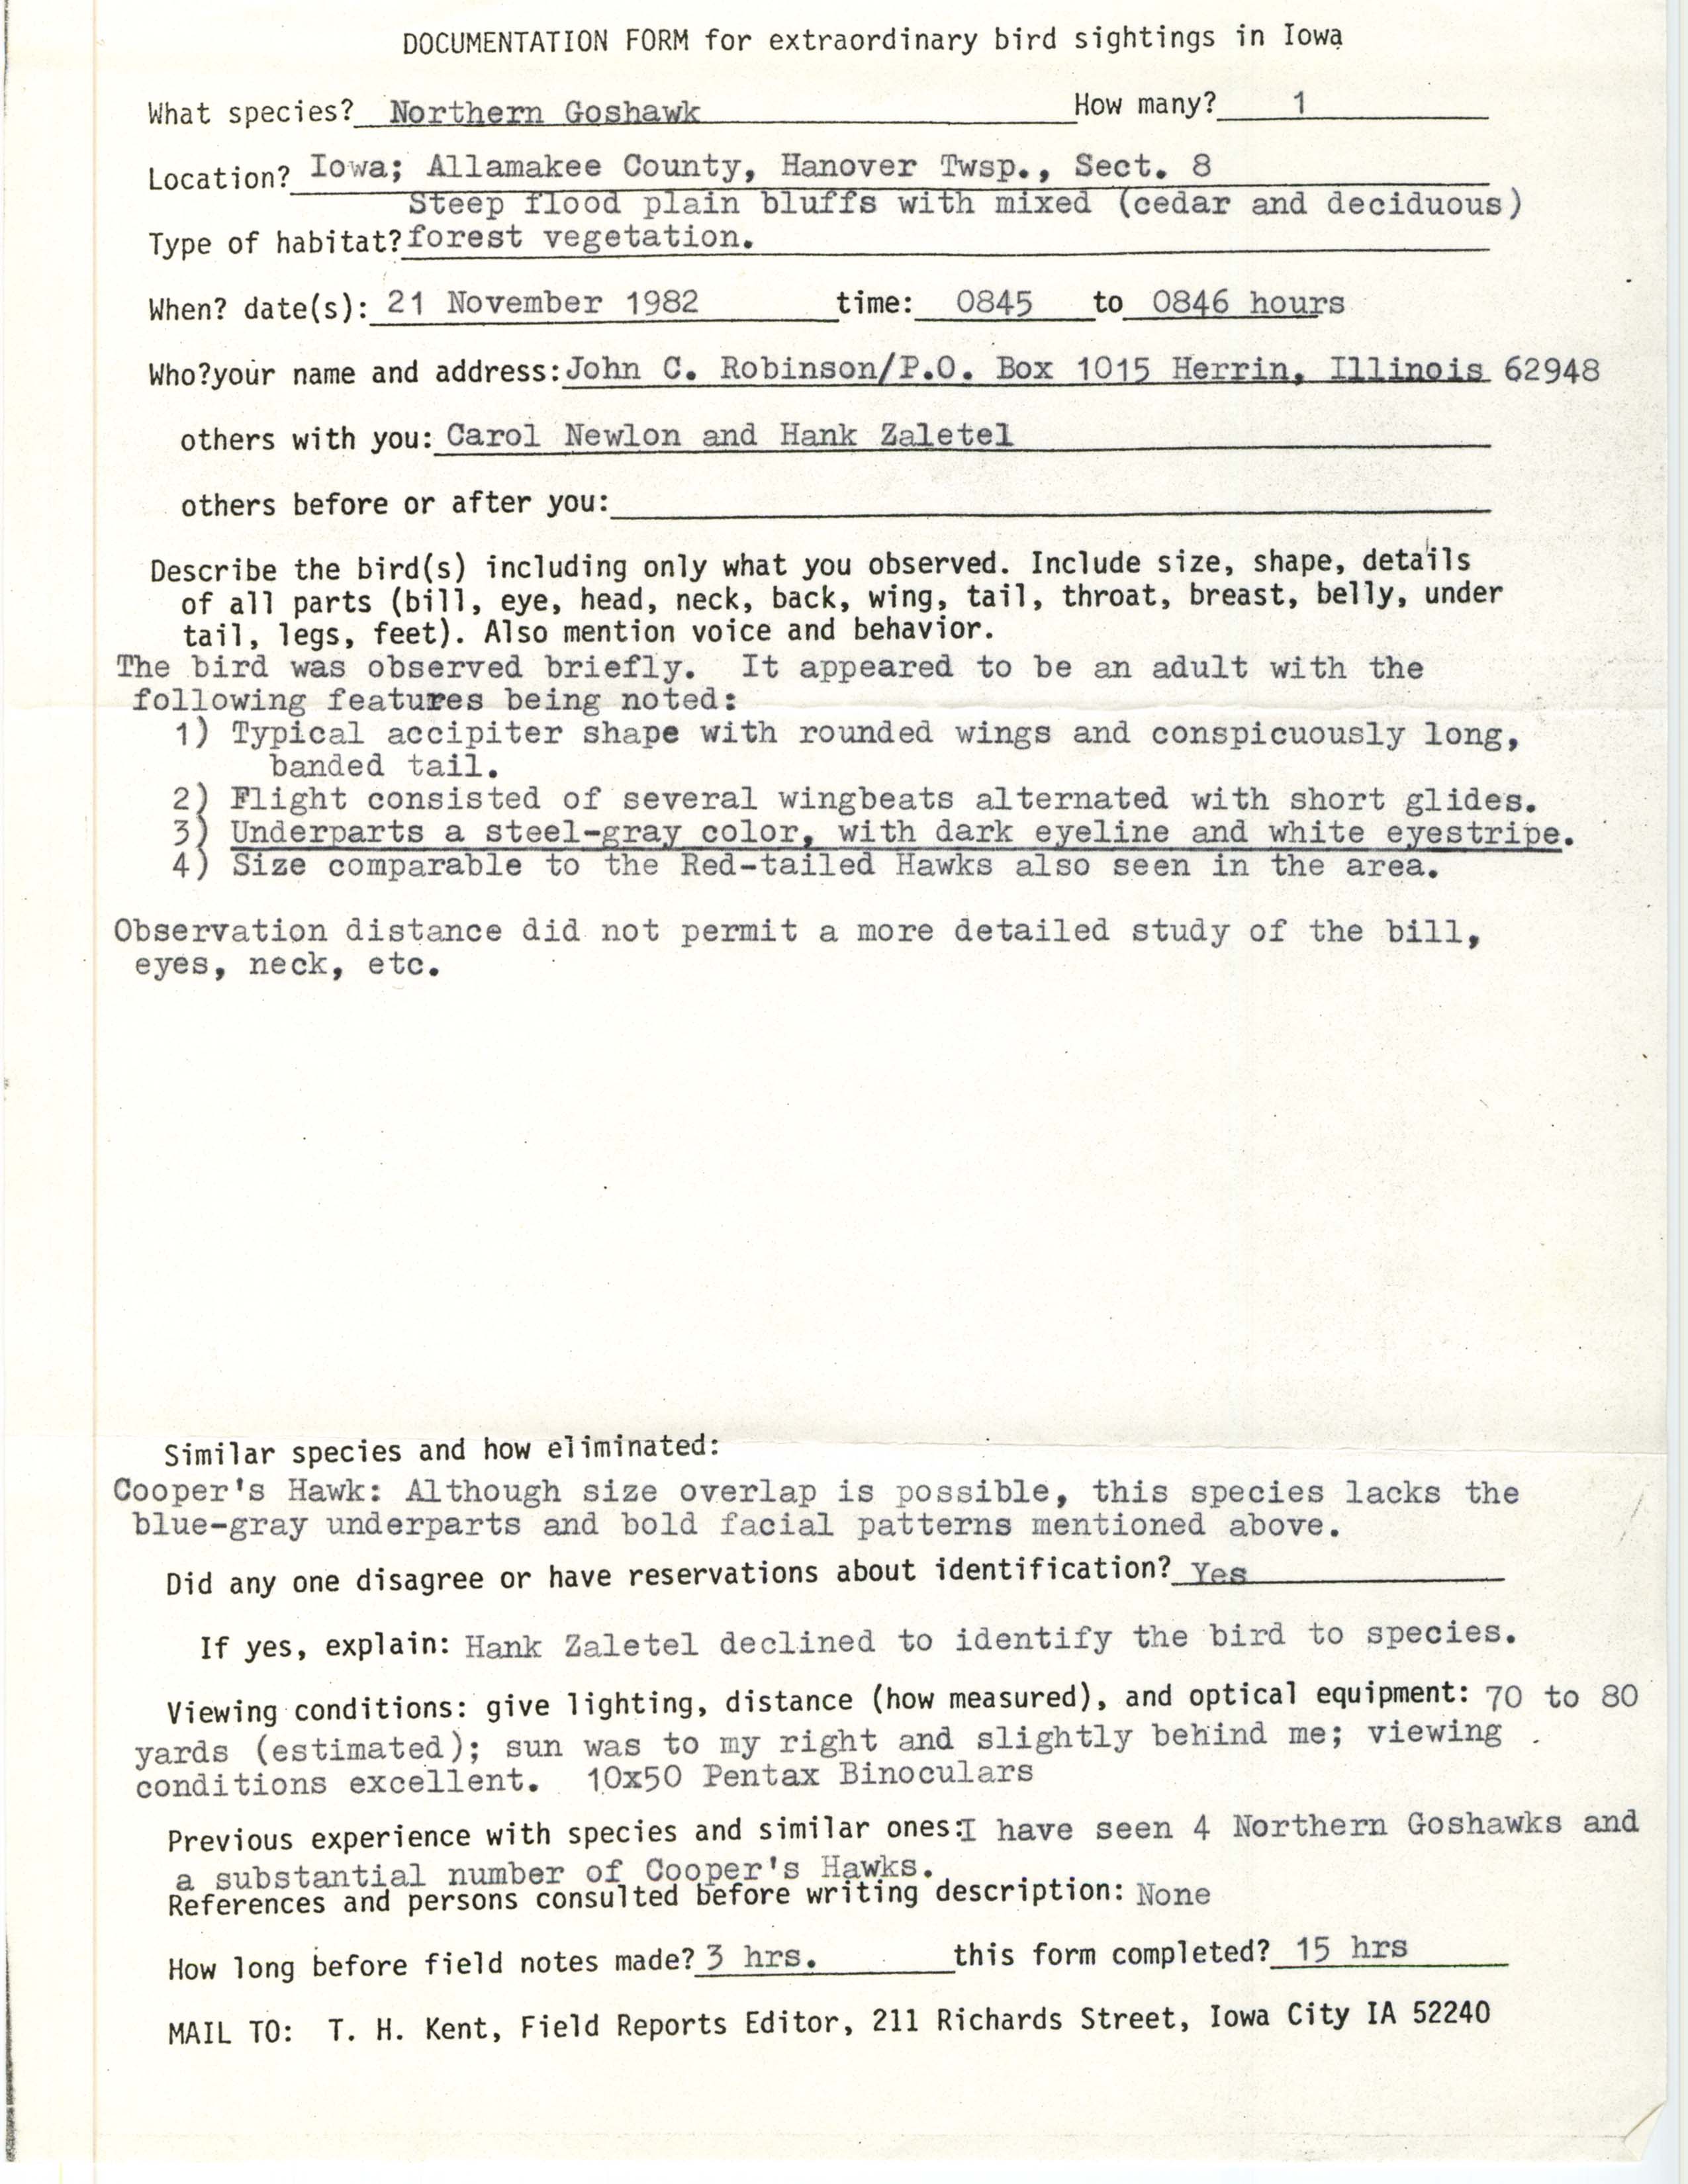 Rare bird documentation form for Northern Goshawk at Hanover Township in Allamakee County, 1982